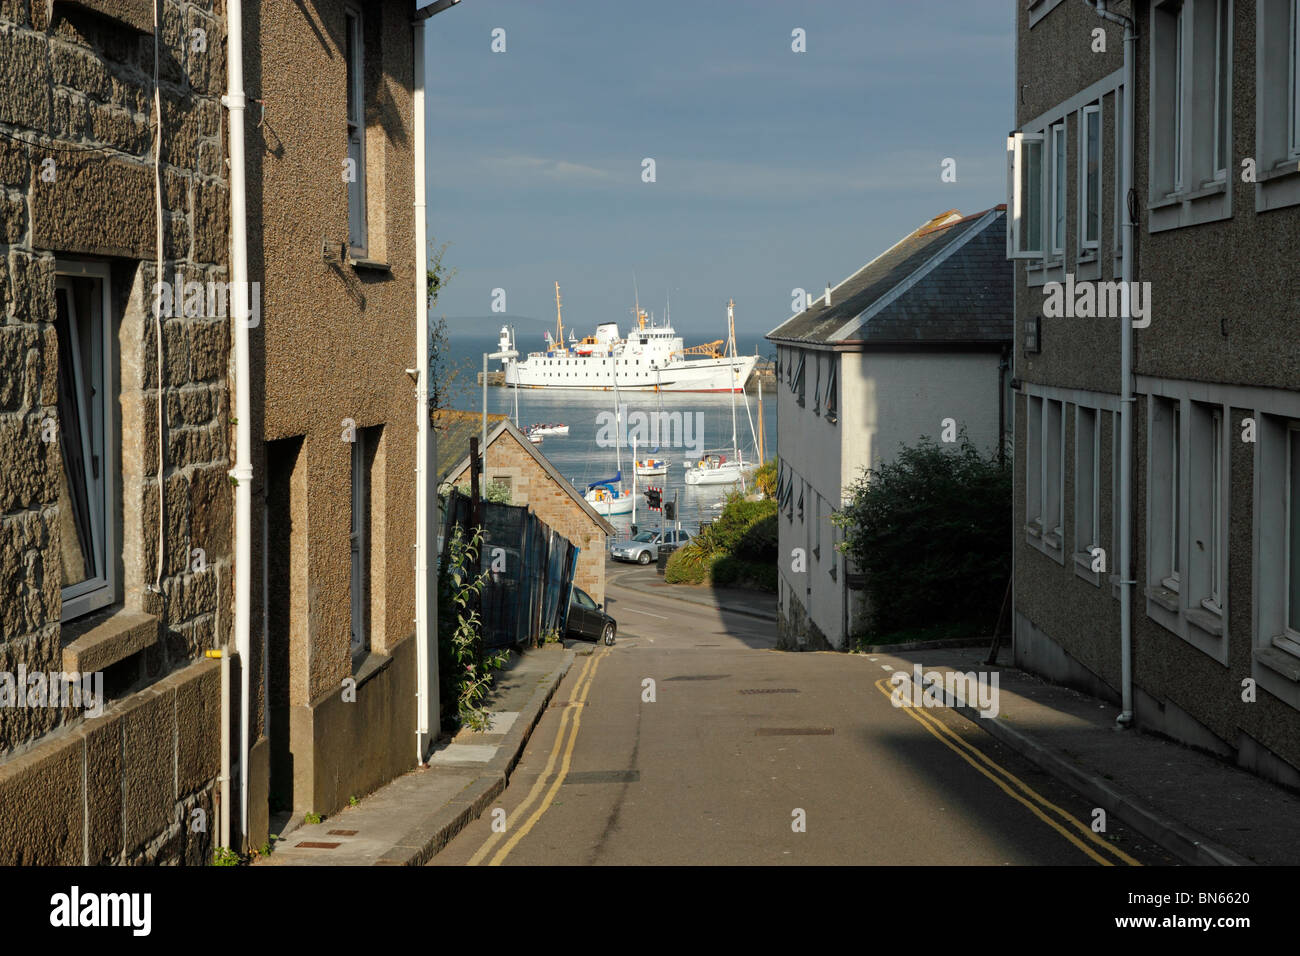 Looking down a street in Penzance with the Scillonian III in the harbour. Stock Photo